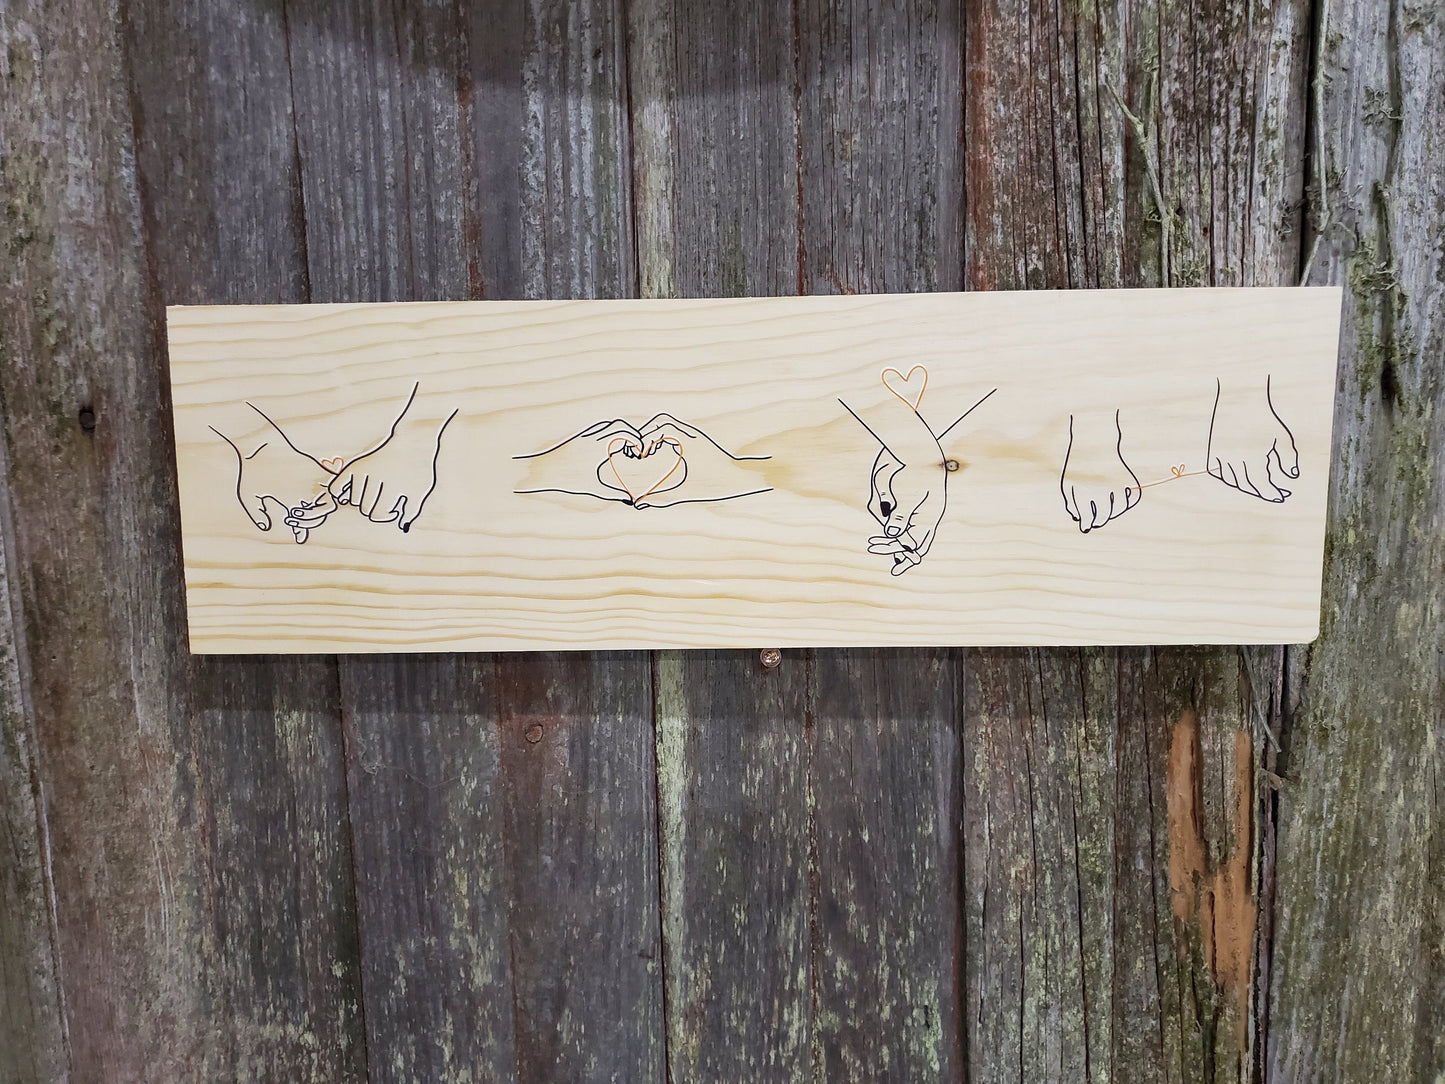 Holding Hands Wood Sign Spouse Loved One Hands String Together Love Heart Line Drawing Gift Colored Wood Print Gift for Wife Husband